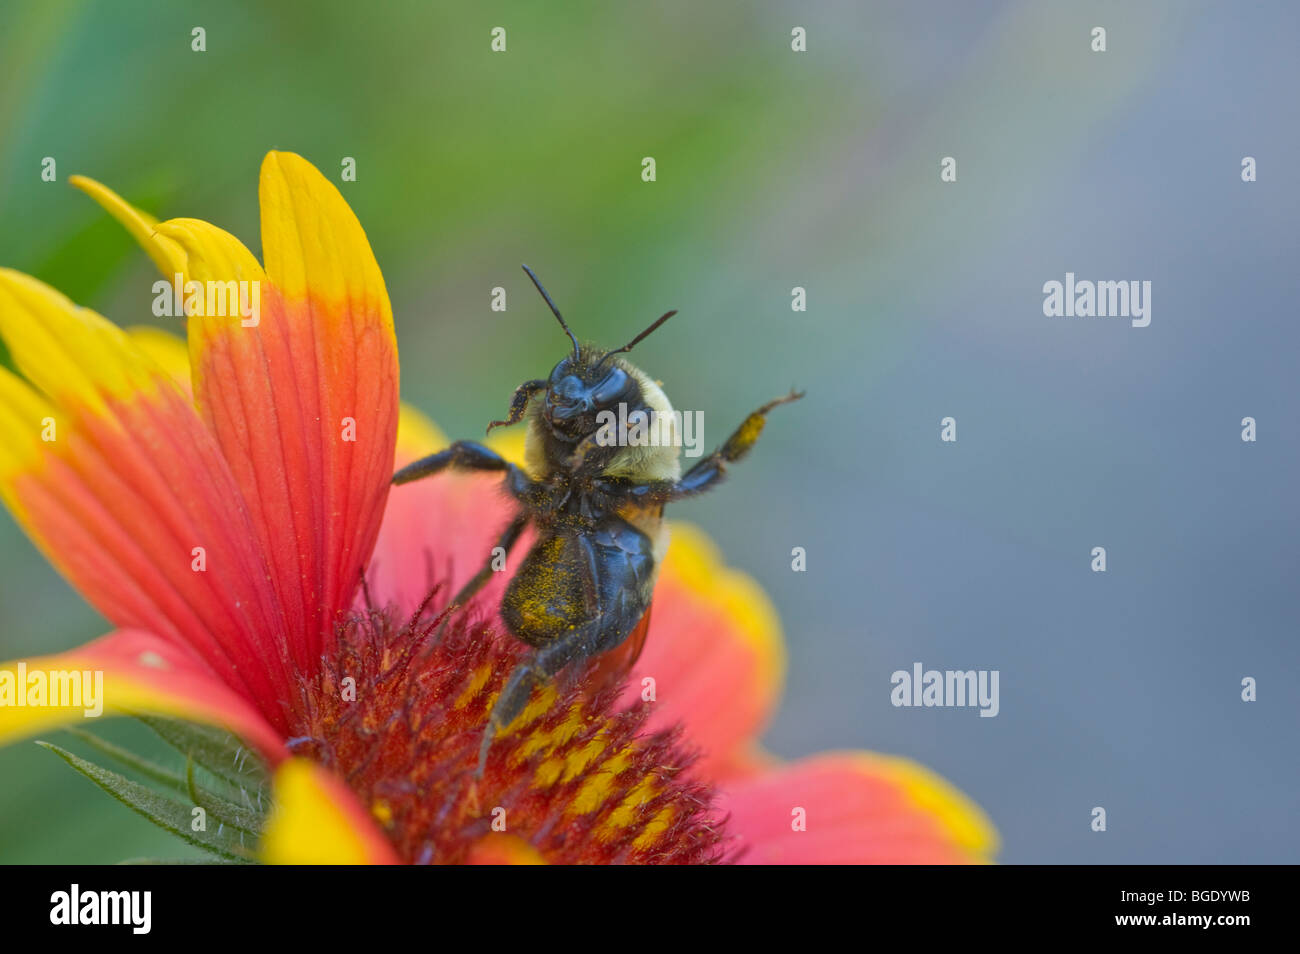 A bee stands upright on a flower facing the camera and appears to be waving at the photographer Stock Photo